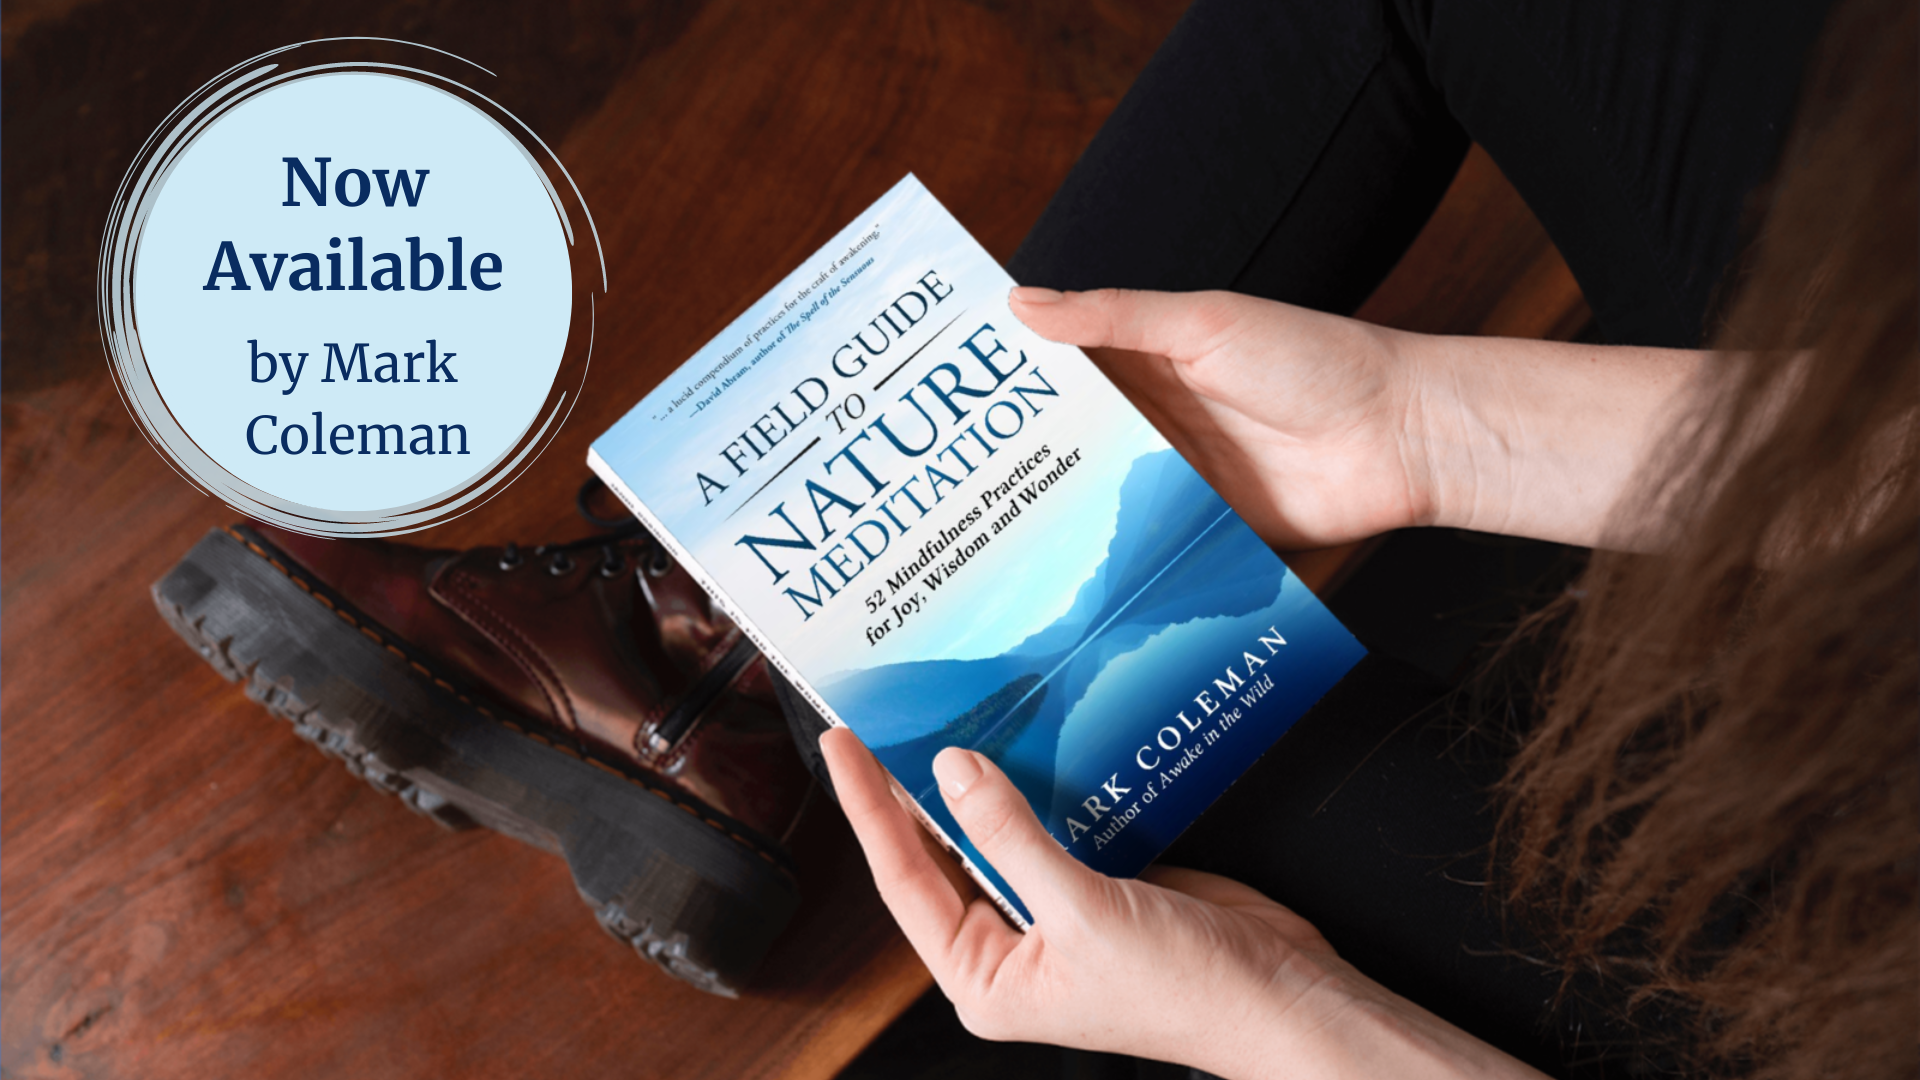 A Field Guide to Nature Meditation by Mark Coleman